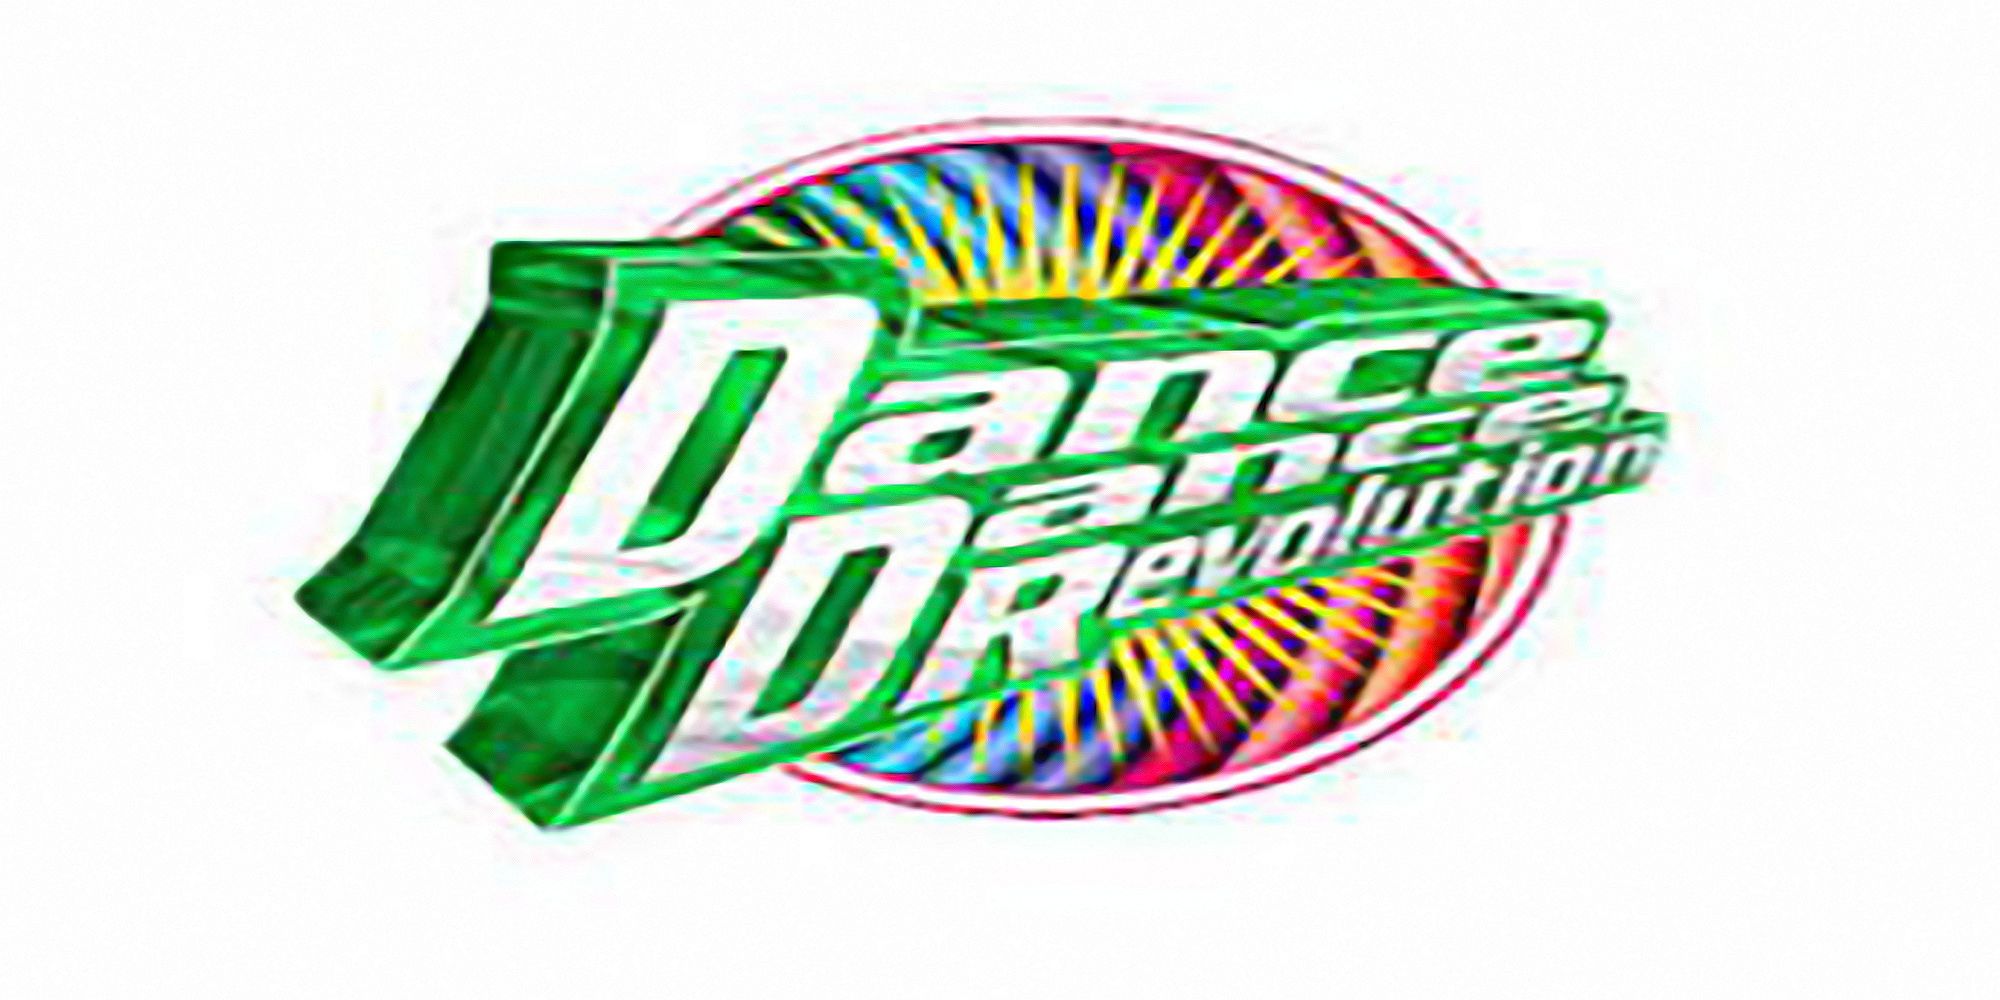 The original Dance Dance Revolution logo serves at the background for the aptly named track, Dance Dance Revolution, from Dance Dance Revolution EXTREME.